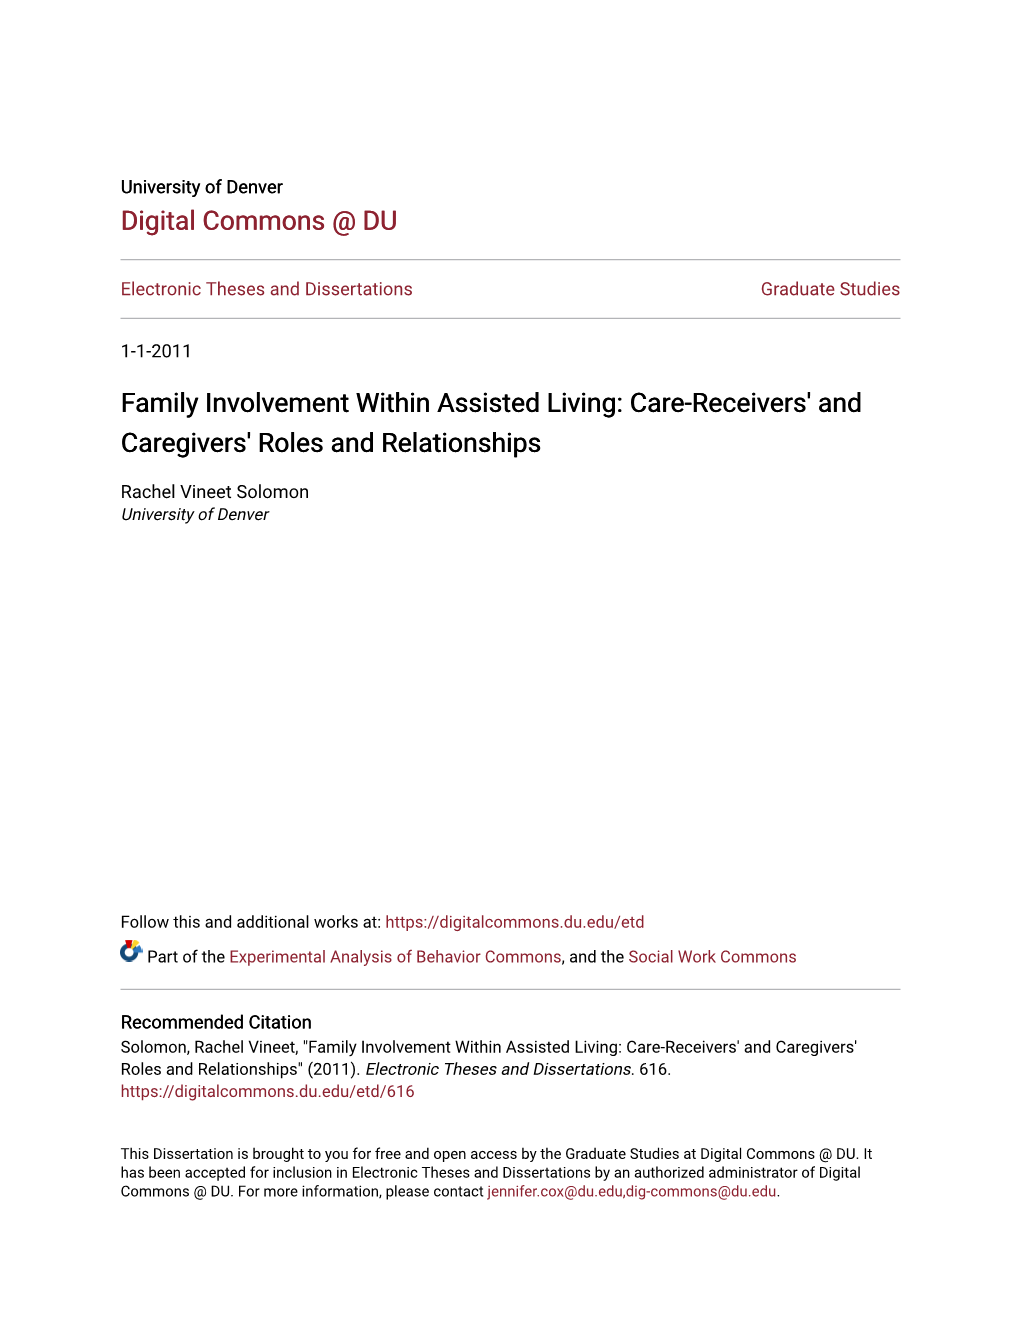 Family Involvement Within Assisted Living: Care-Receivers' and Caregivers' Roles and Relationships